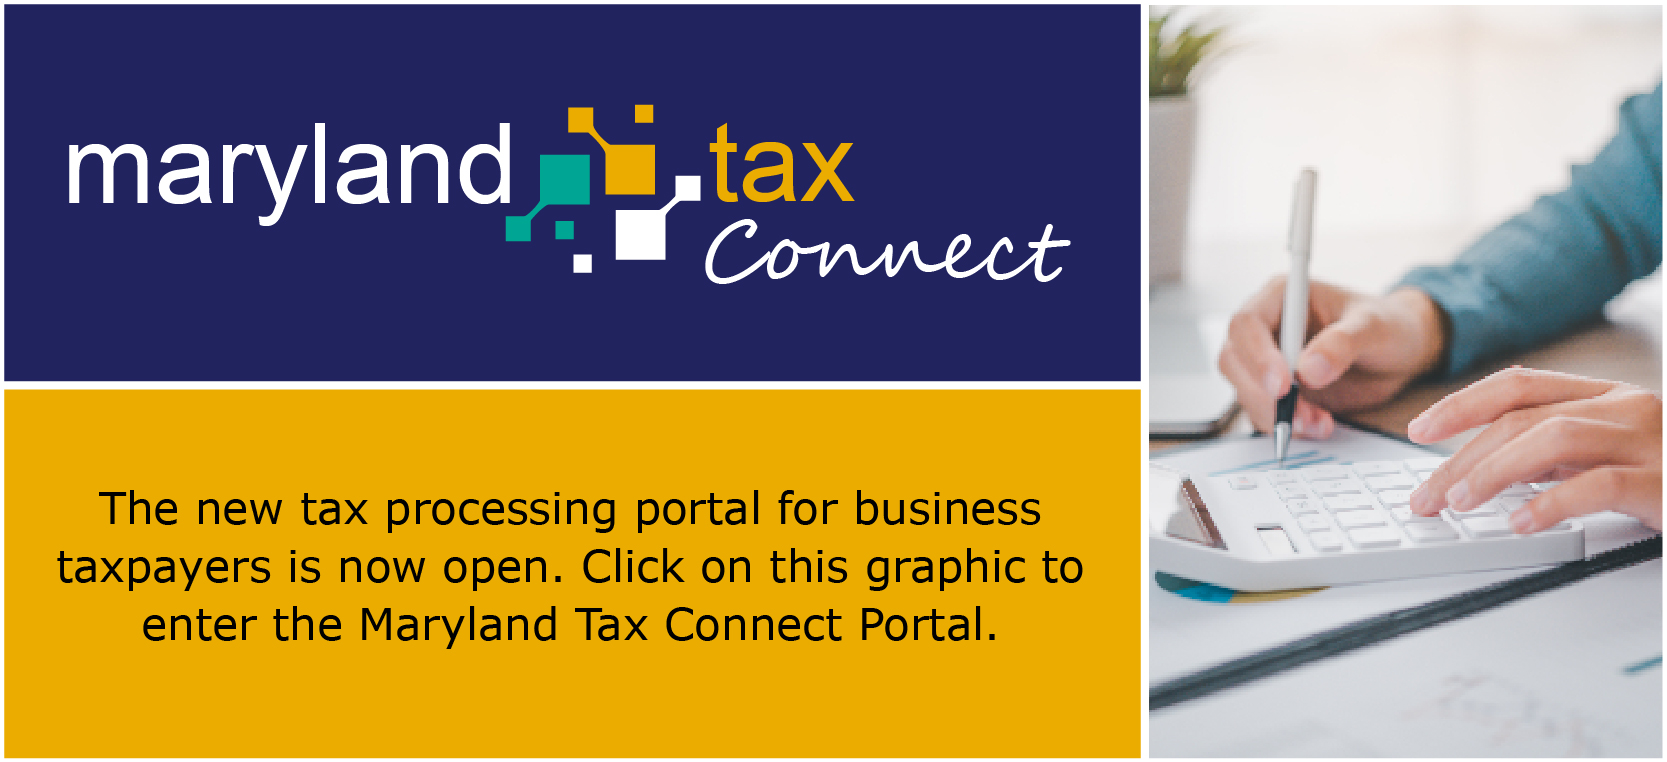 The new tax processing portal for business taxpayers is now open. Click on this graphic to enter the Maryland Tax Connect Portal.